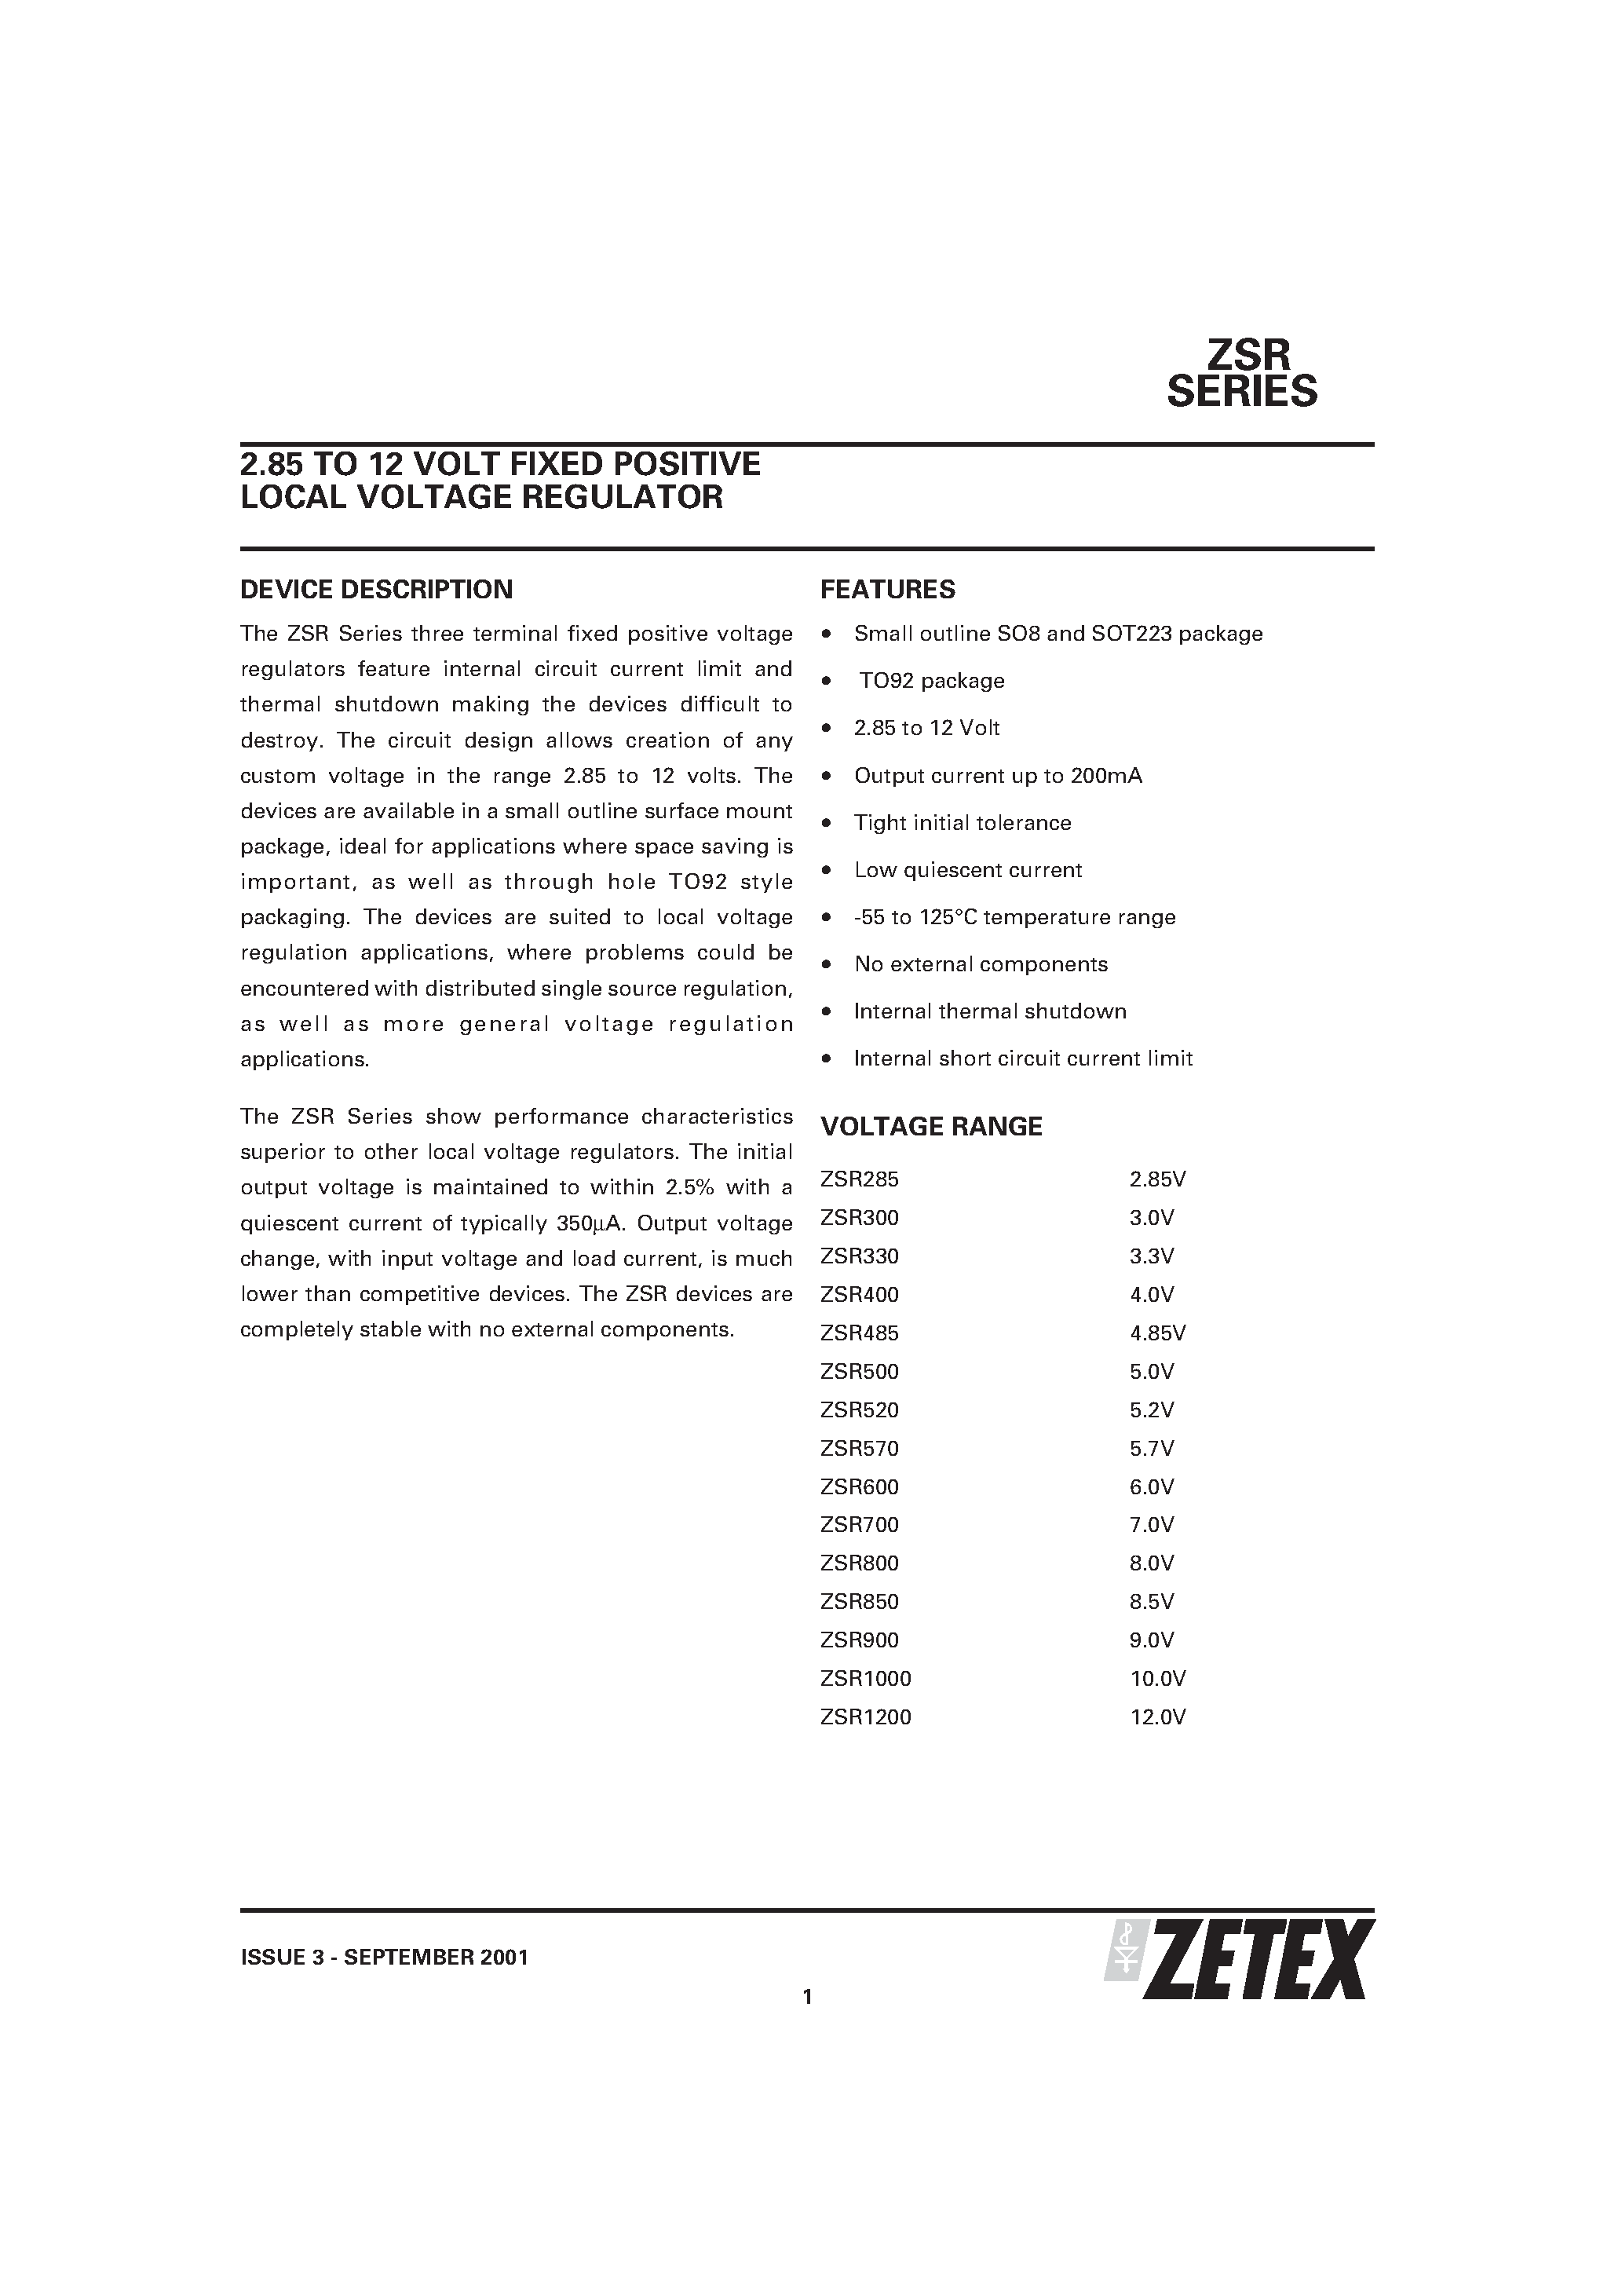 Datasheet ZSR1200 - 2.85 TO 12 VOLT FIXED POSITIVE LOCAL VOLTAGE REGULATOR page 1